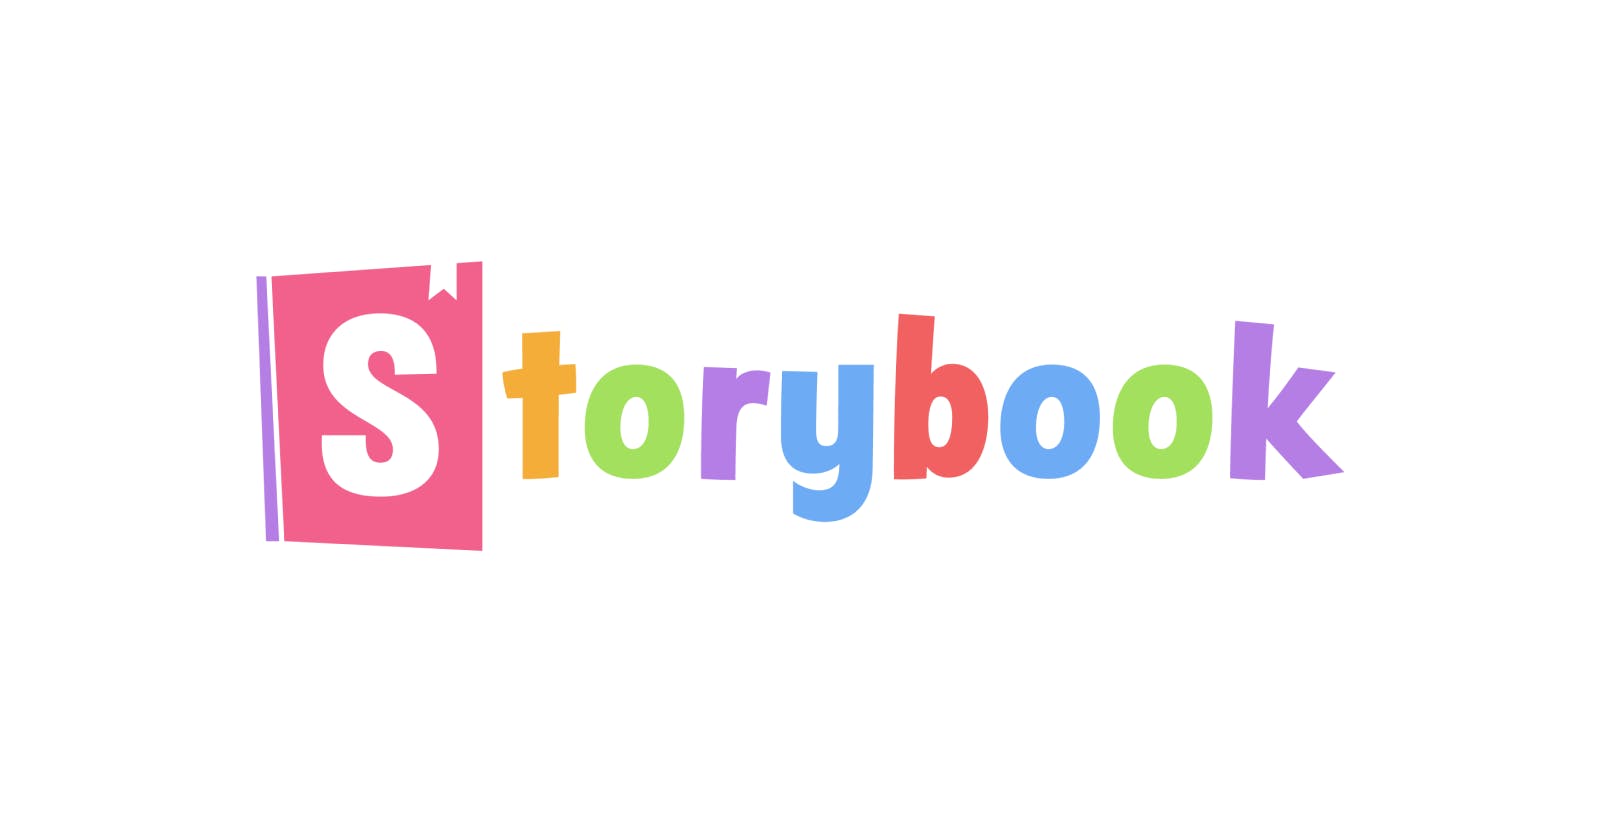 Getting started with Storybook